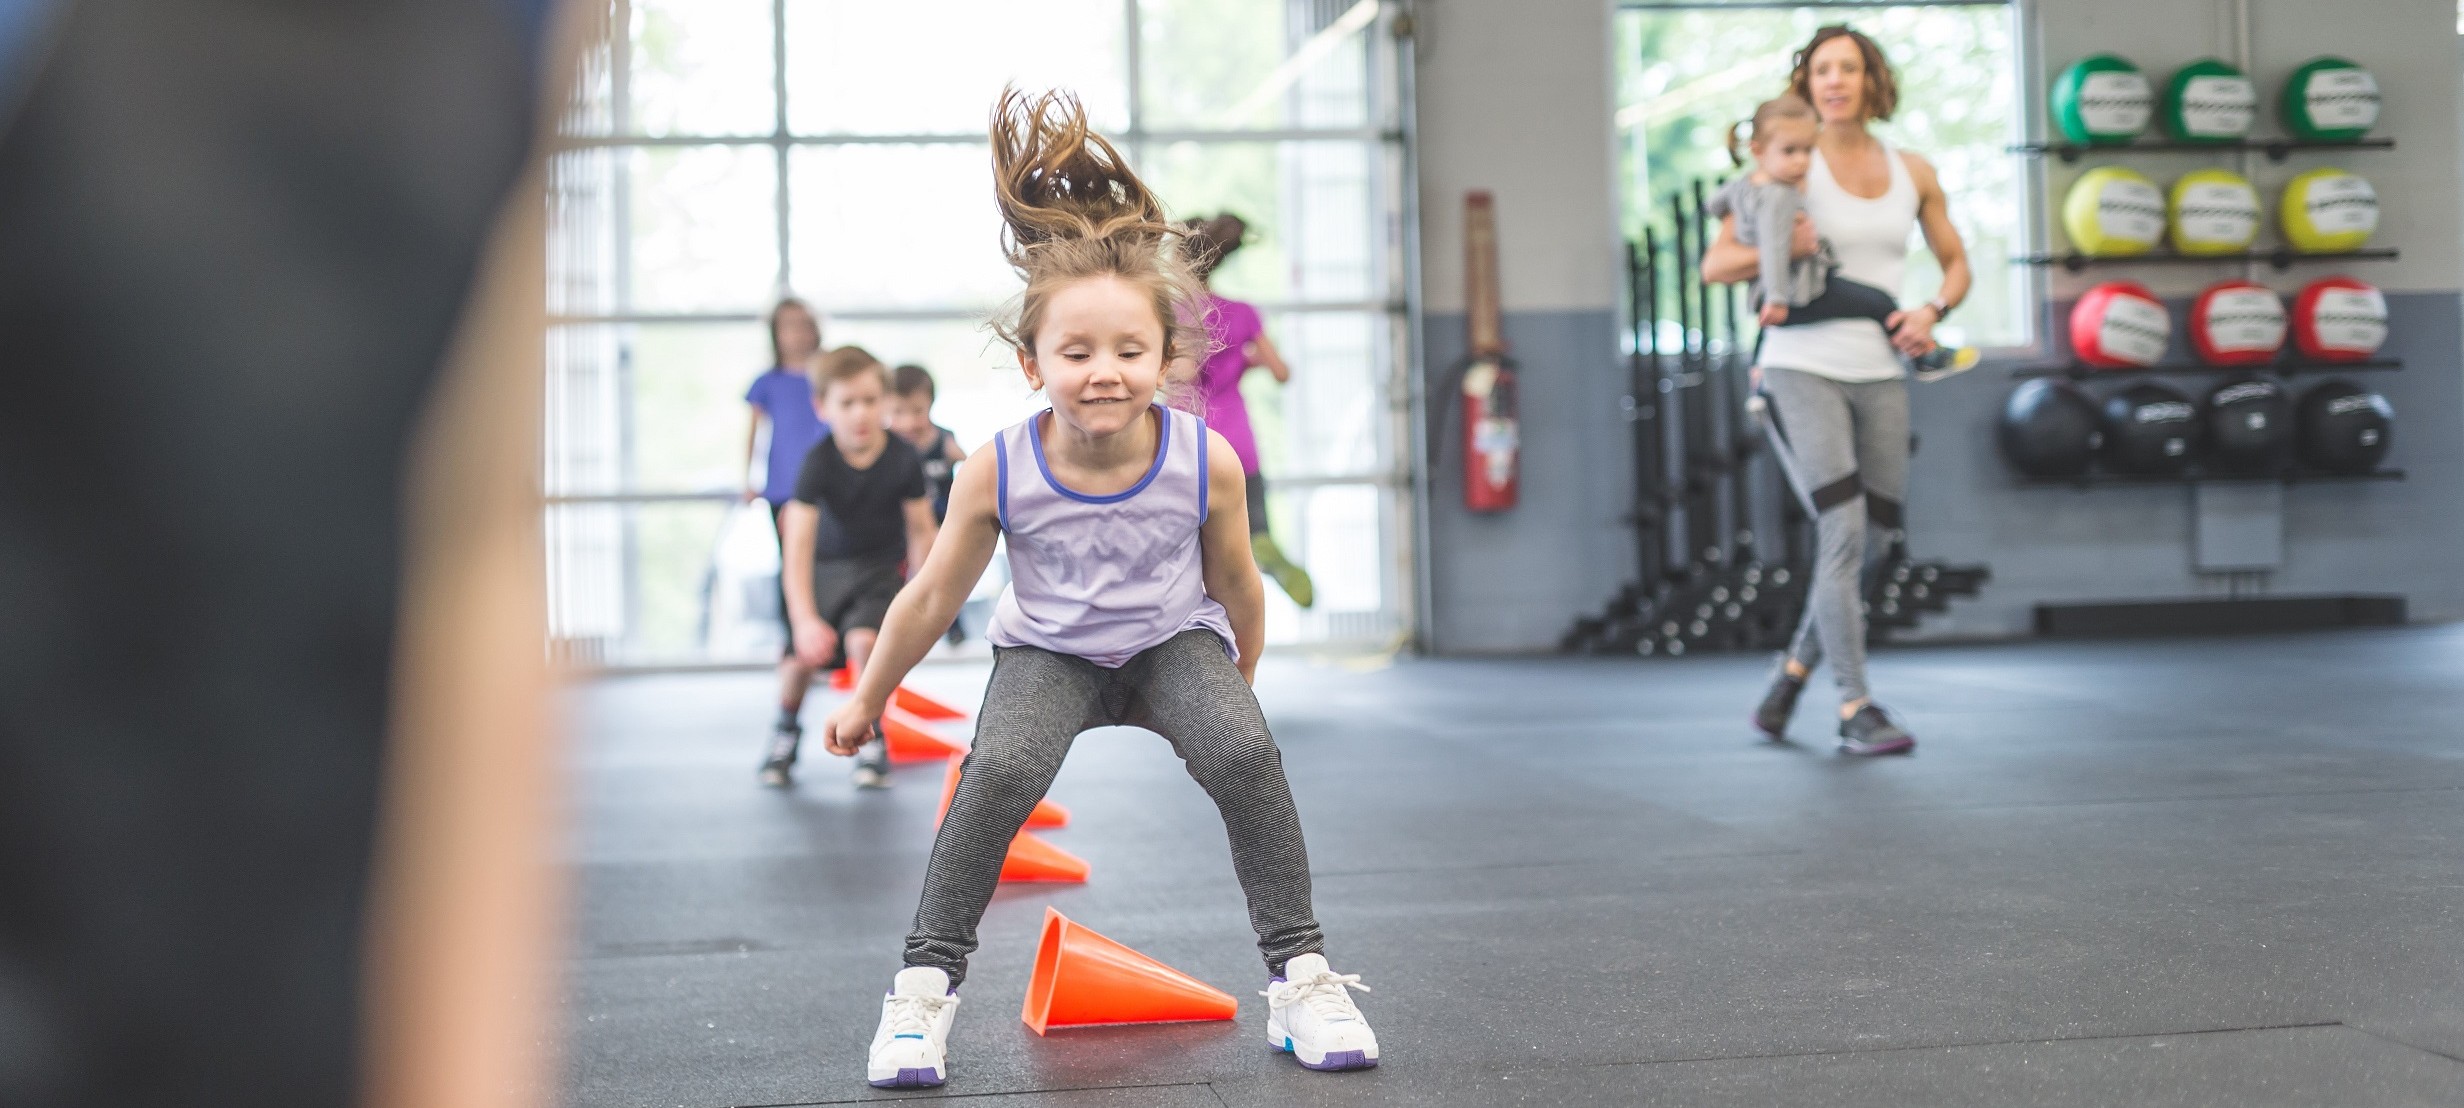 Active kids are smarter and healthier